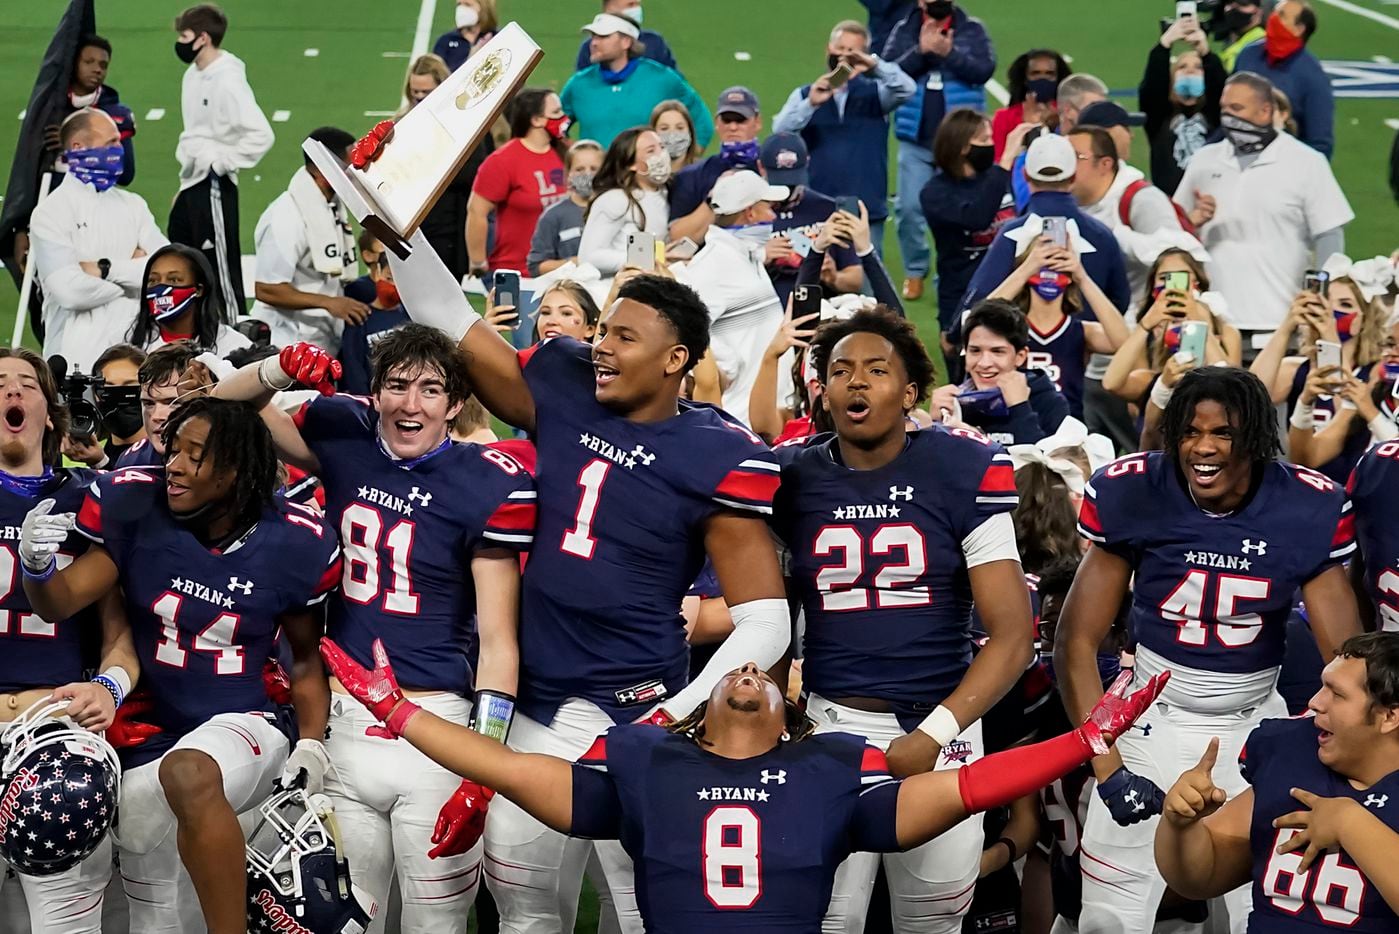 Denton Ryan’s Ja'Tavion Sanders (1) hoists the championship trophy as players celebrate a 59-14 victory over Cedar Park to win the Class 5A Division I state football championship game at AT&T Stadium on Friday, Jan. 15, 2021, in Arlington, Texas. (Smiley N. Pool/The Dallas Morning News)